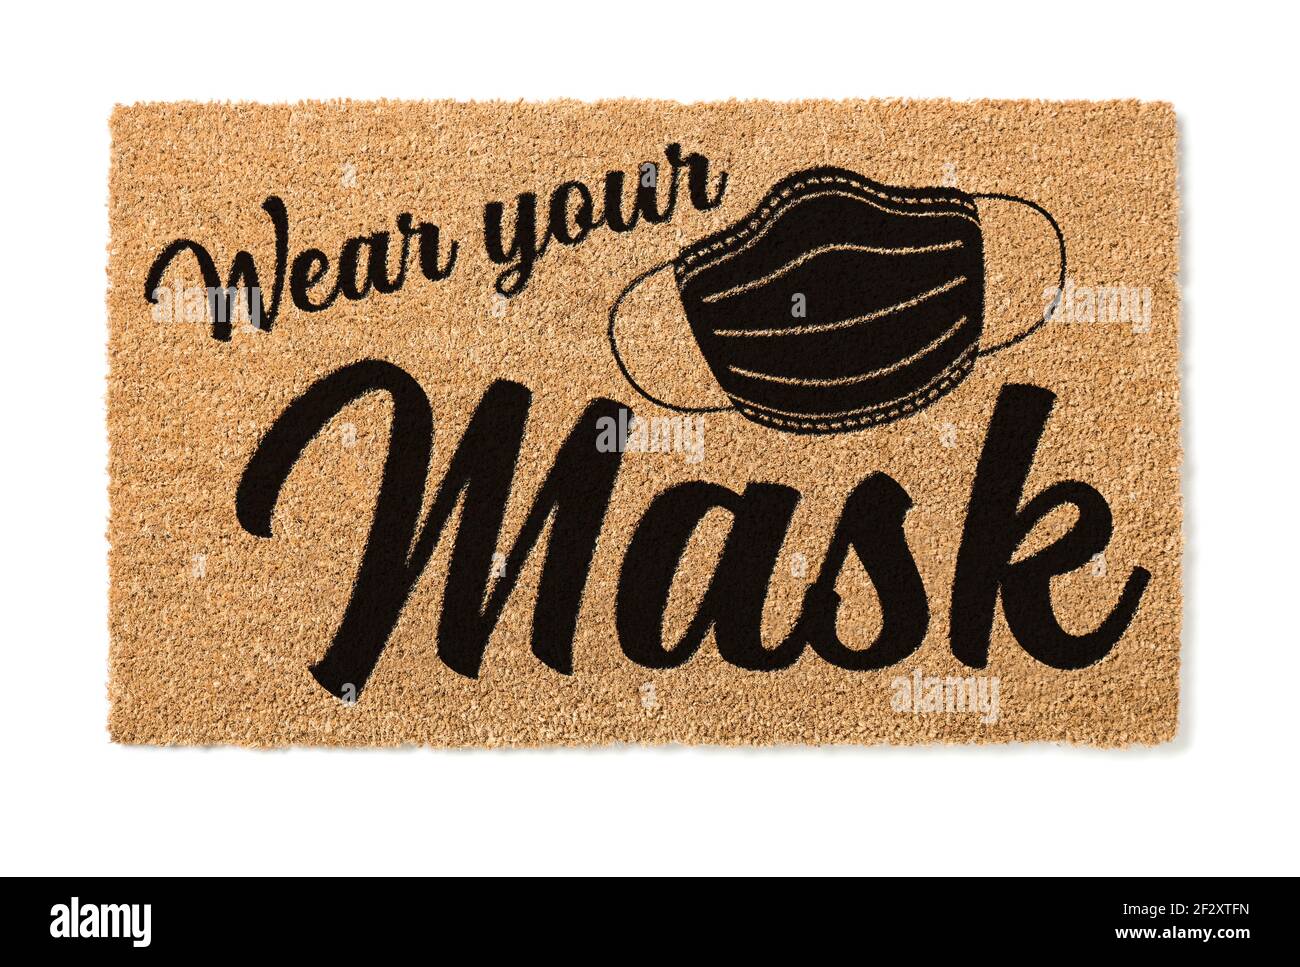 Wear Your Mask Welcome Door Mat Isolated on White Background. Stock Photo